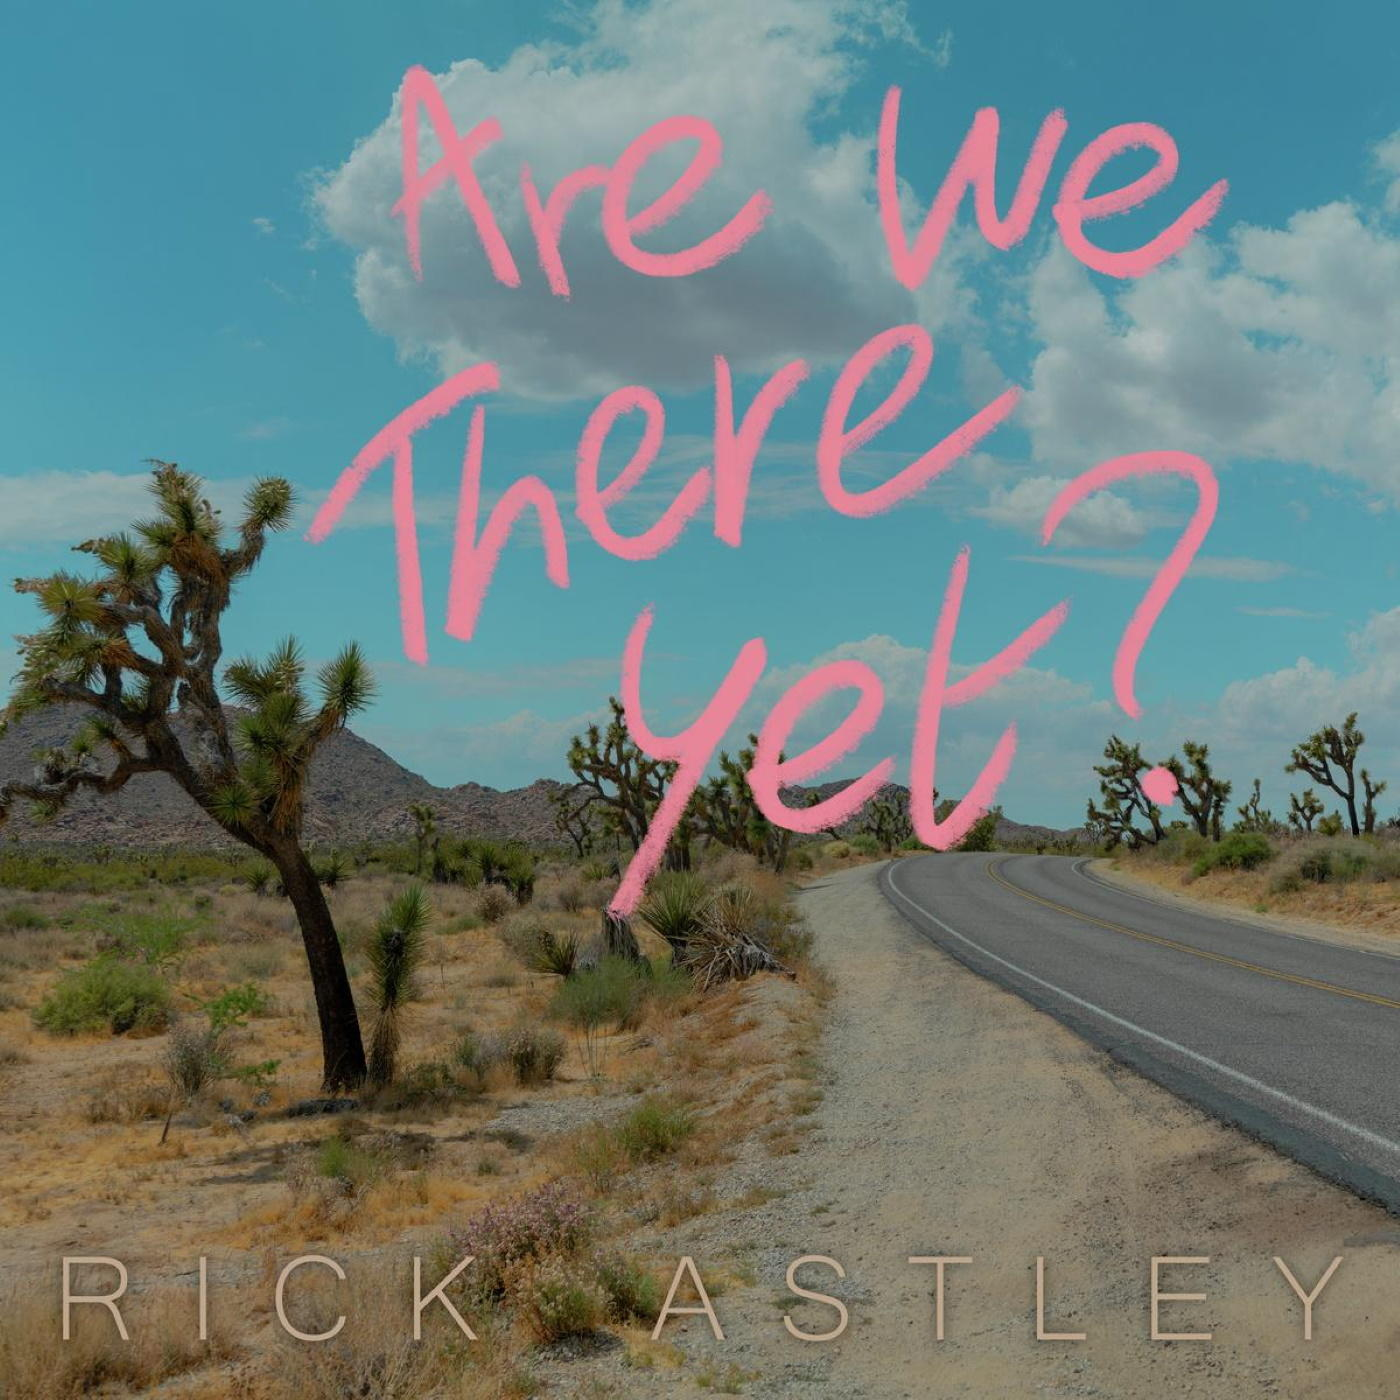 Rick Astley - Are - (Vinyl) Vinyl) There We Yet?(Ltd.Edition Clear